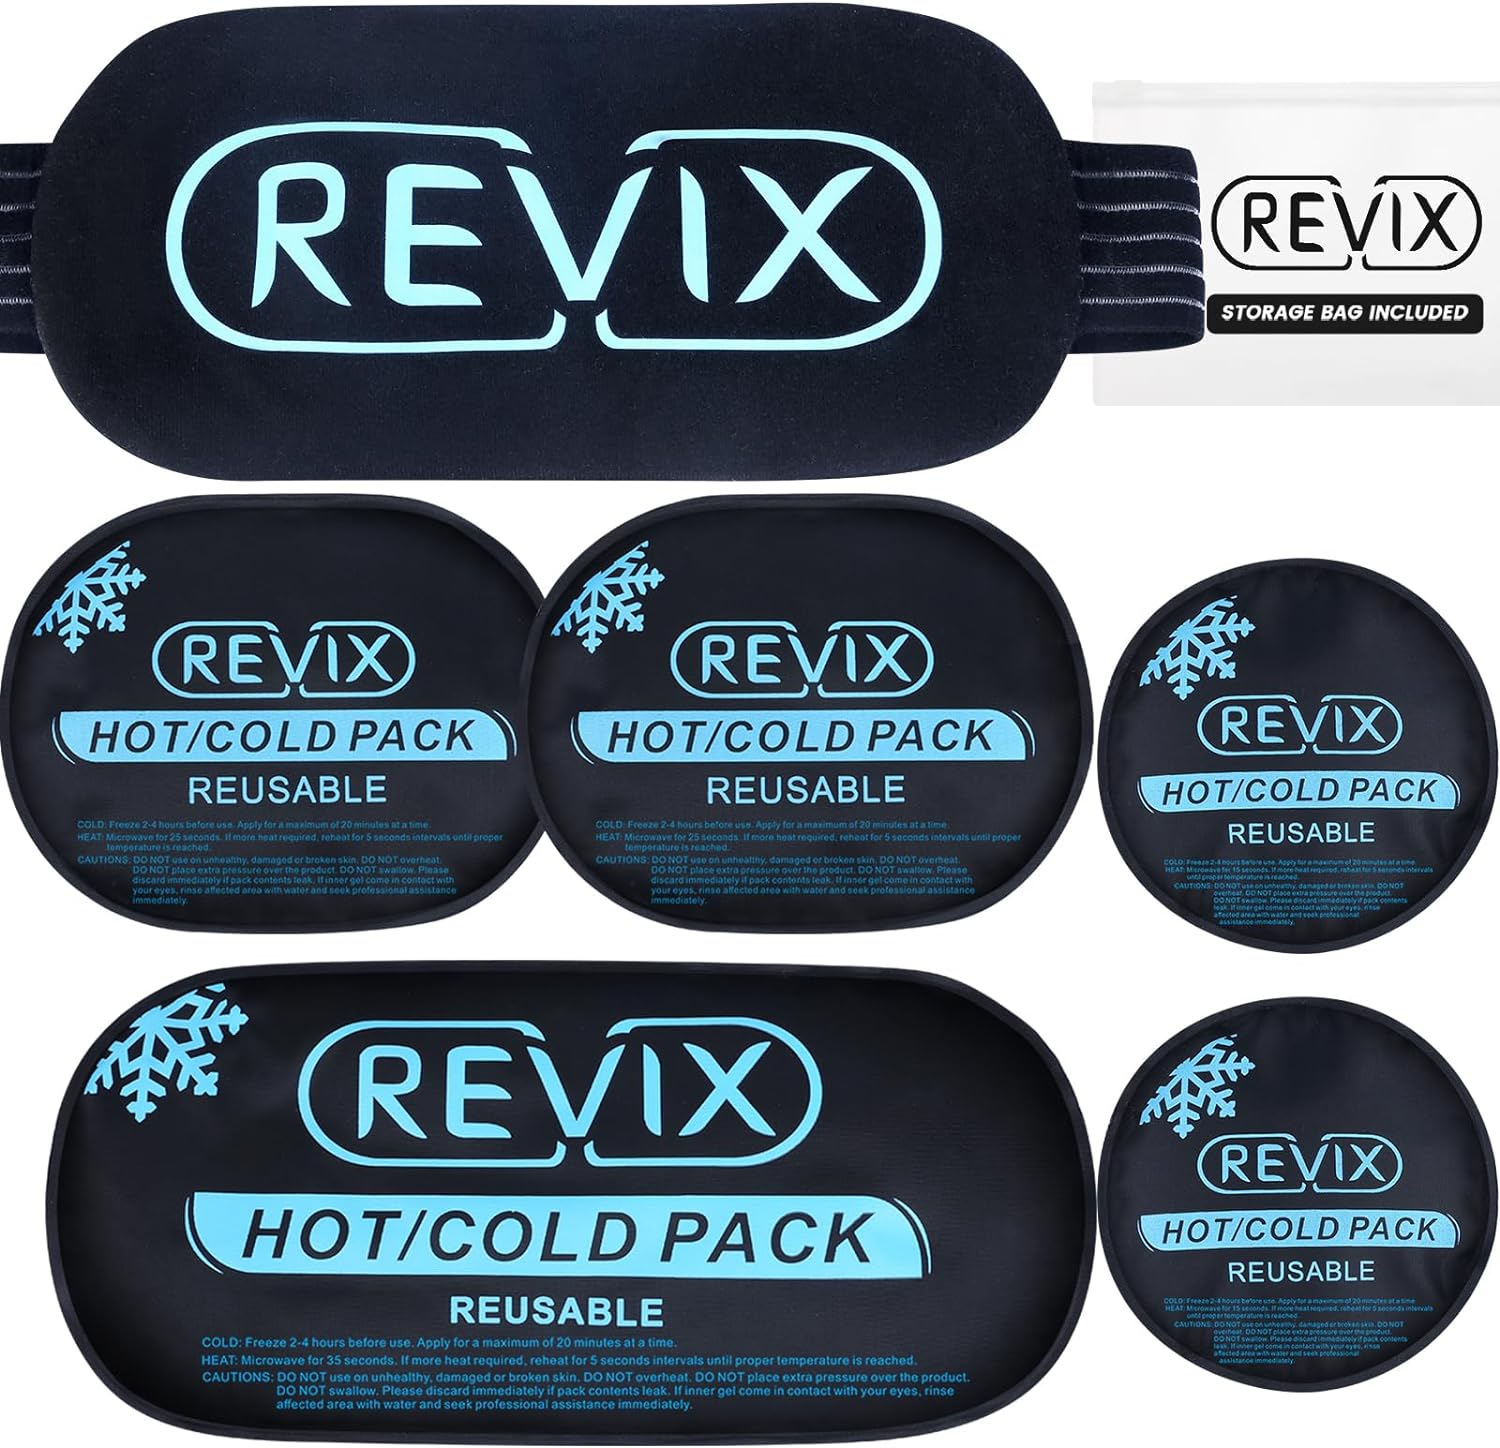 REVIX Ice Packs for Injuries Reusable, 5 Pack Hot and Cold Gel Ice Pac